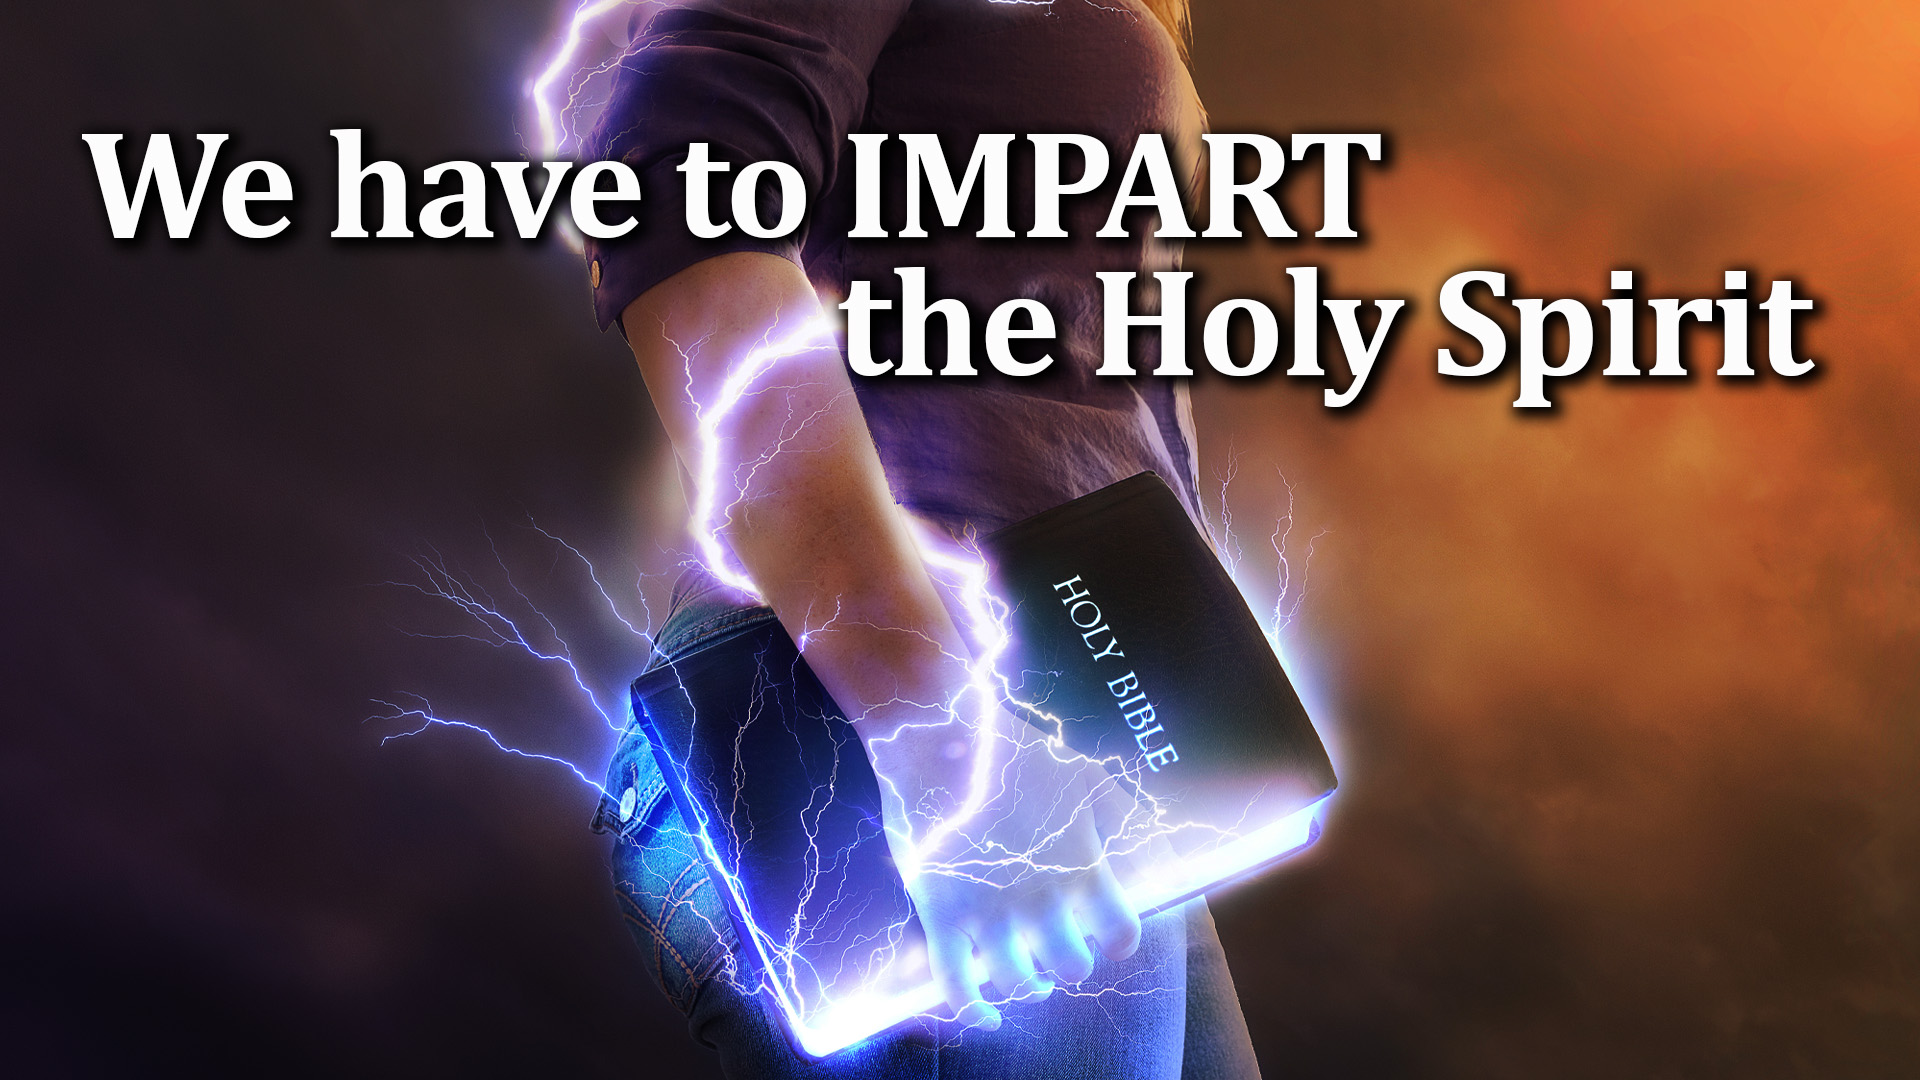 11-16-21 We have to Impart Holy Spirit to Others